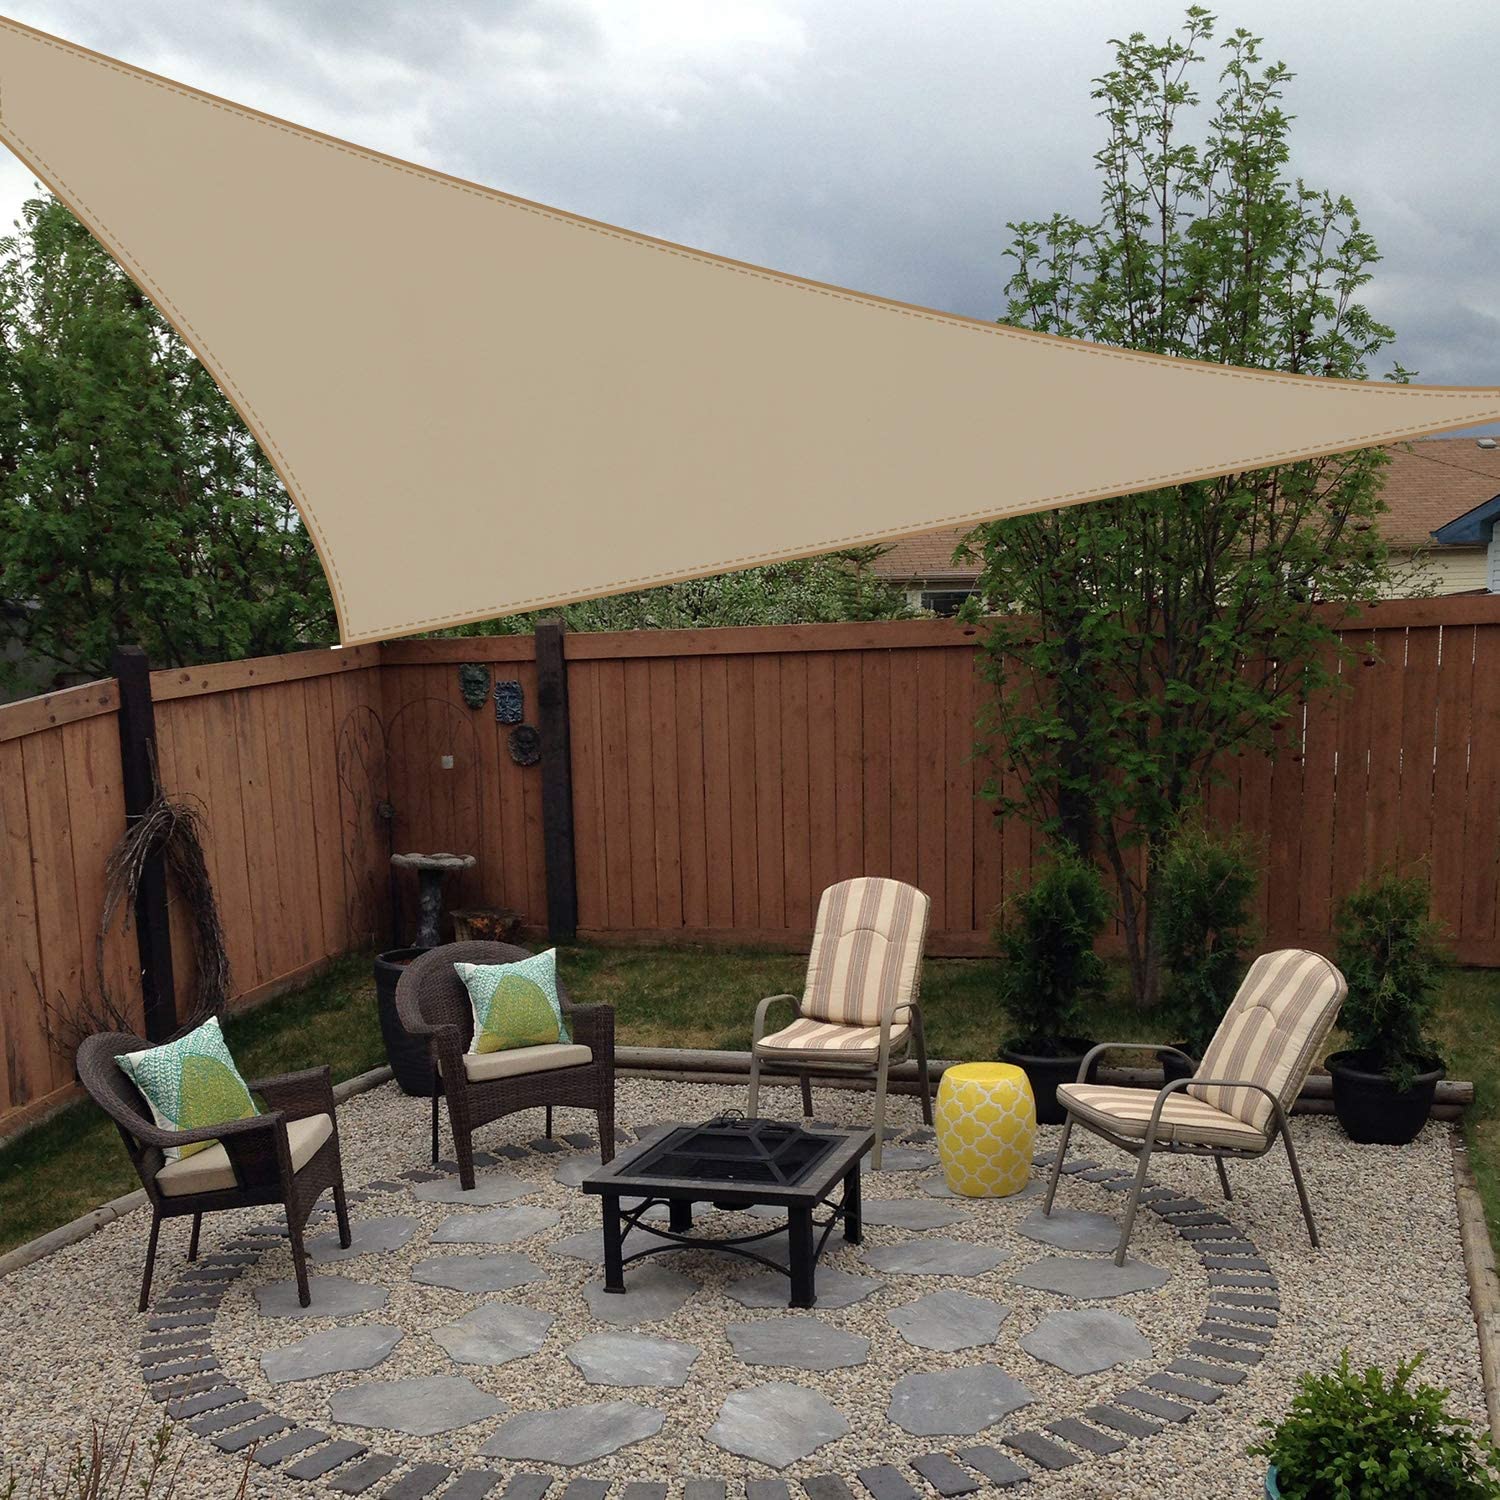 Opaque Privacy Protection Outdoor Waterproof Sun Shade Sail Canopy Triangle UV Block for Patio KGORGE Store